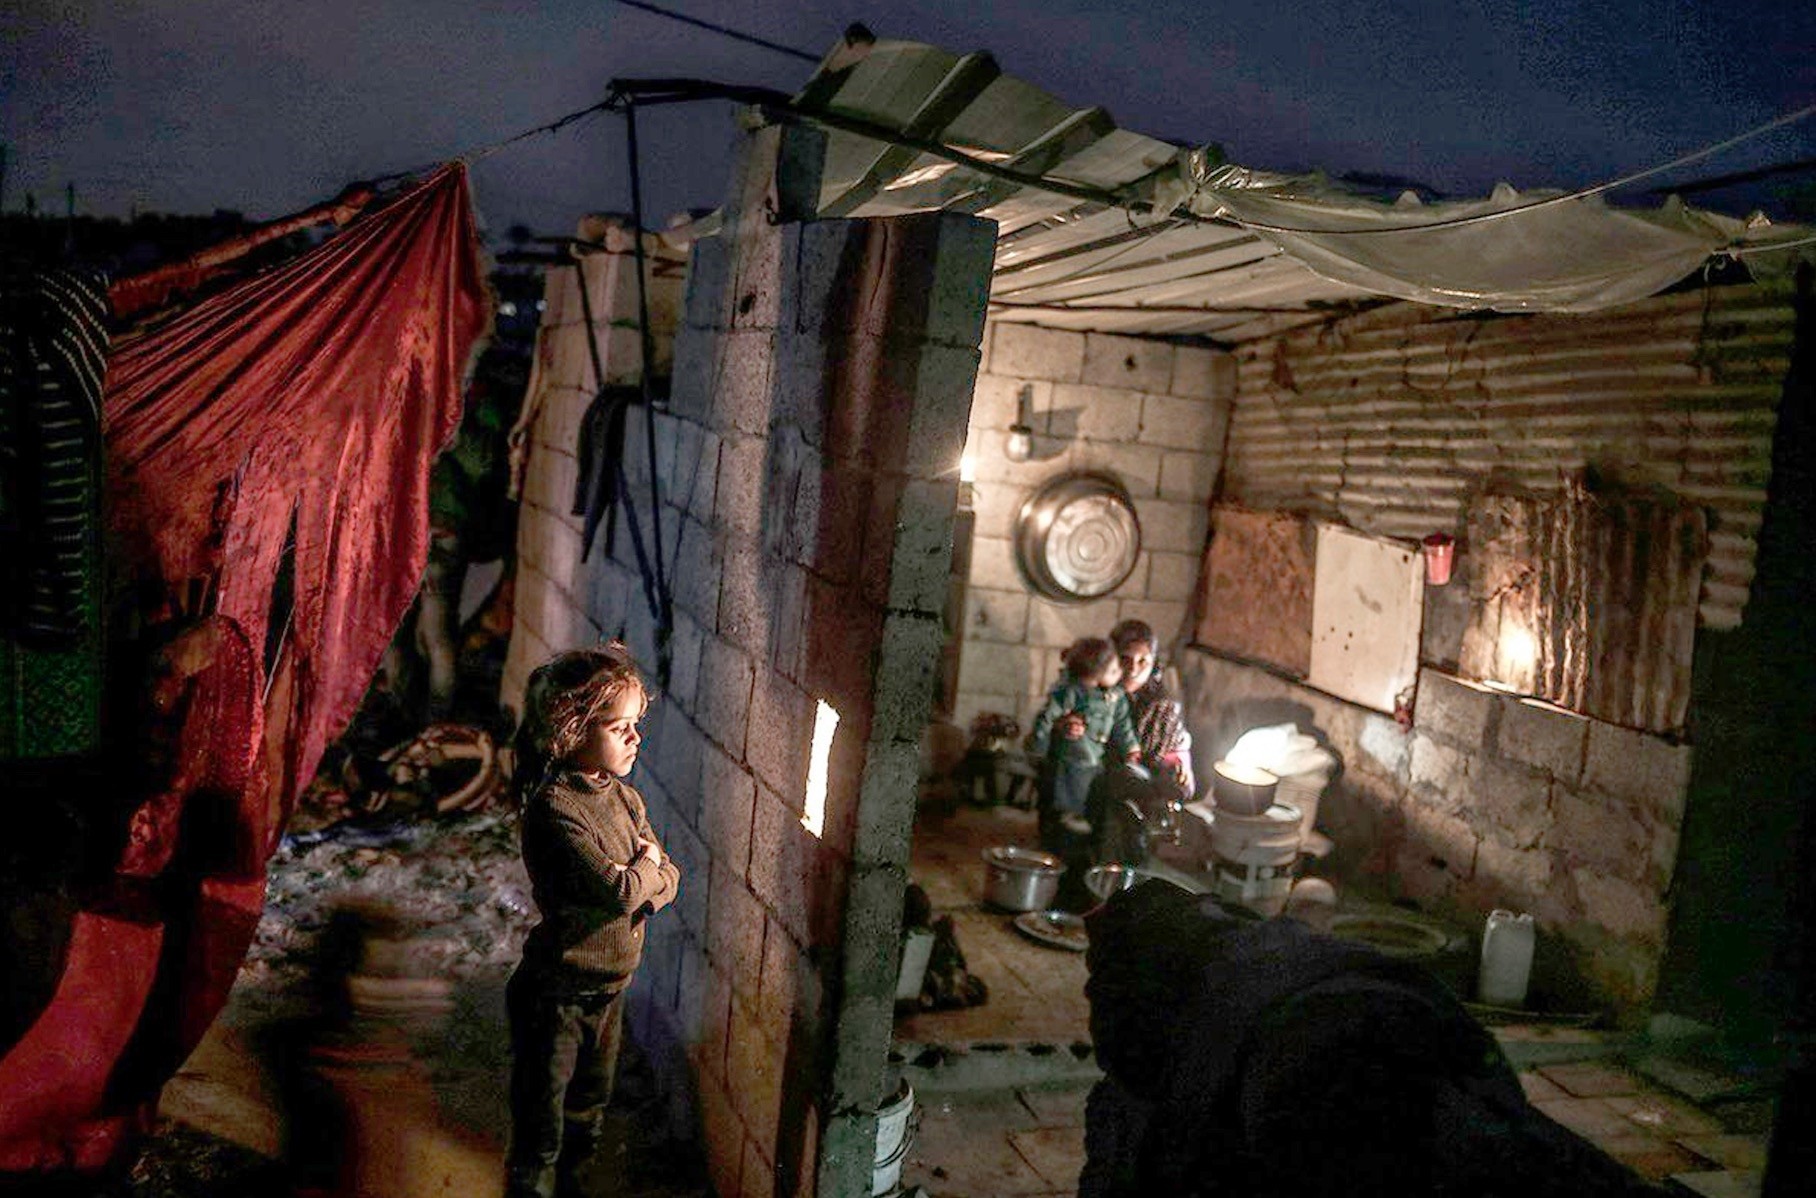 The people of Gaza face a lack of electricity, drinking water and food due to the ongoing Israeli blockade. 